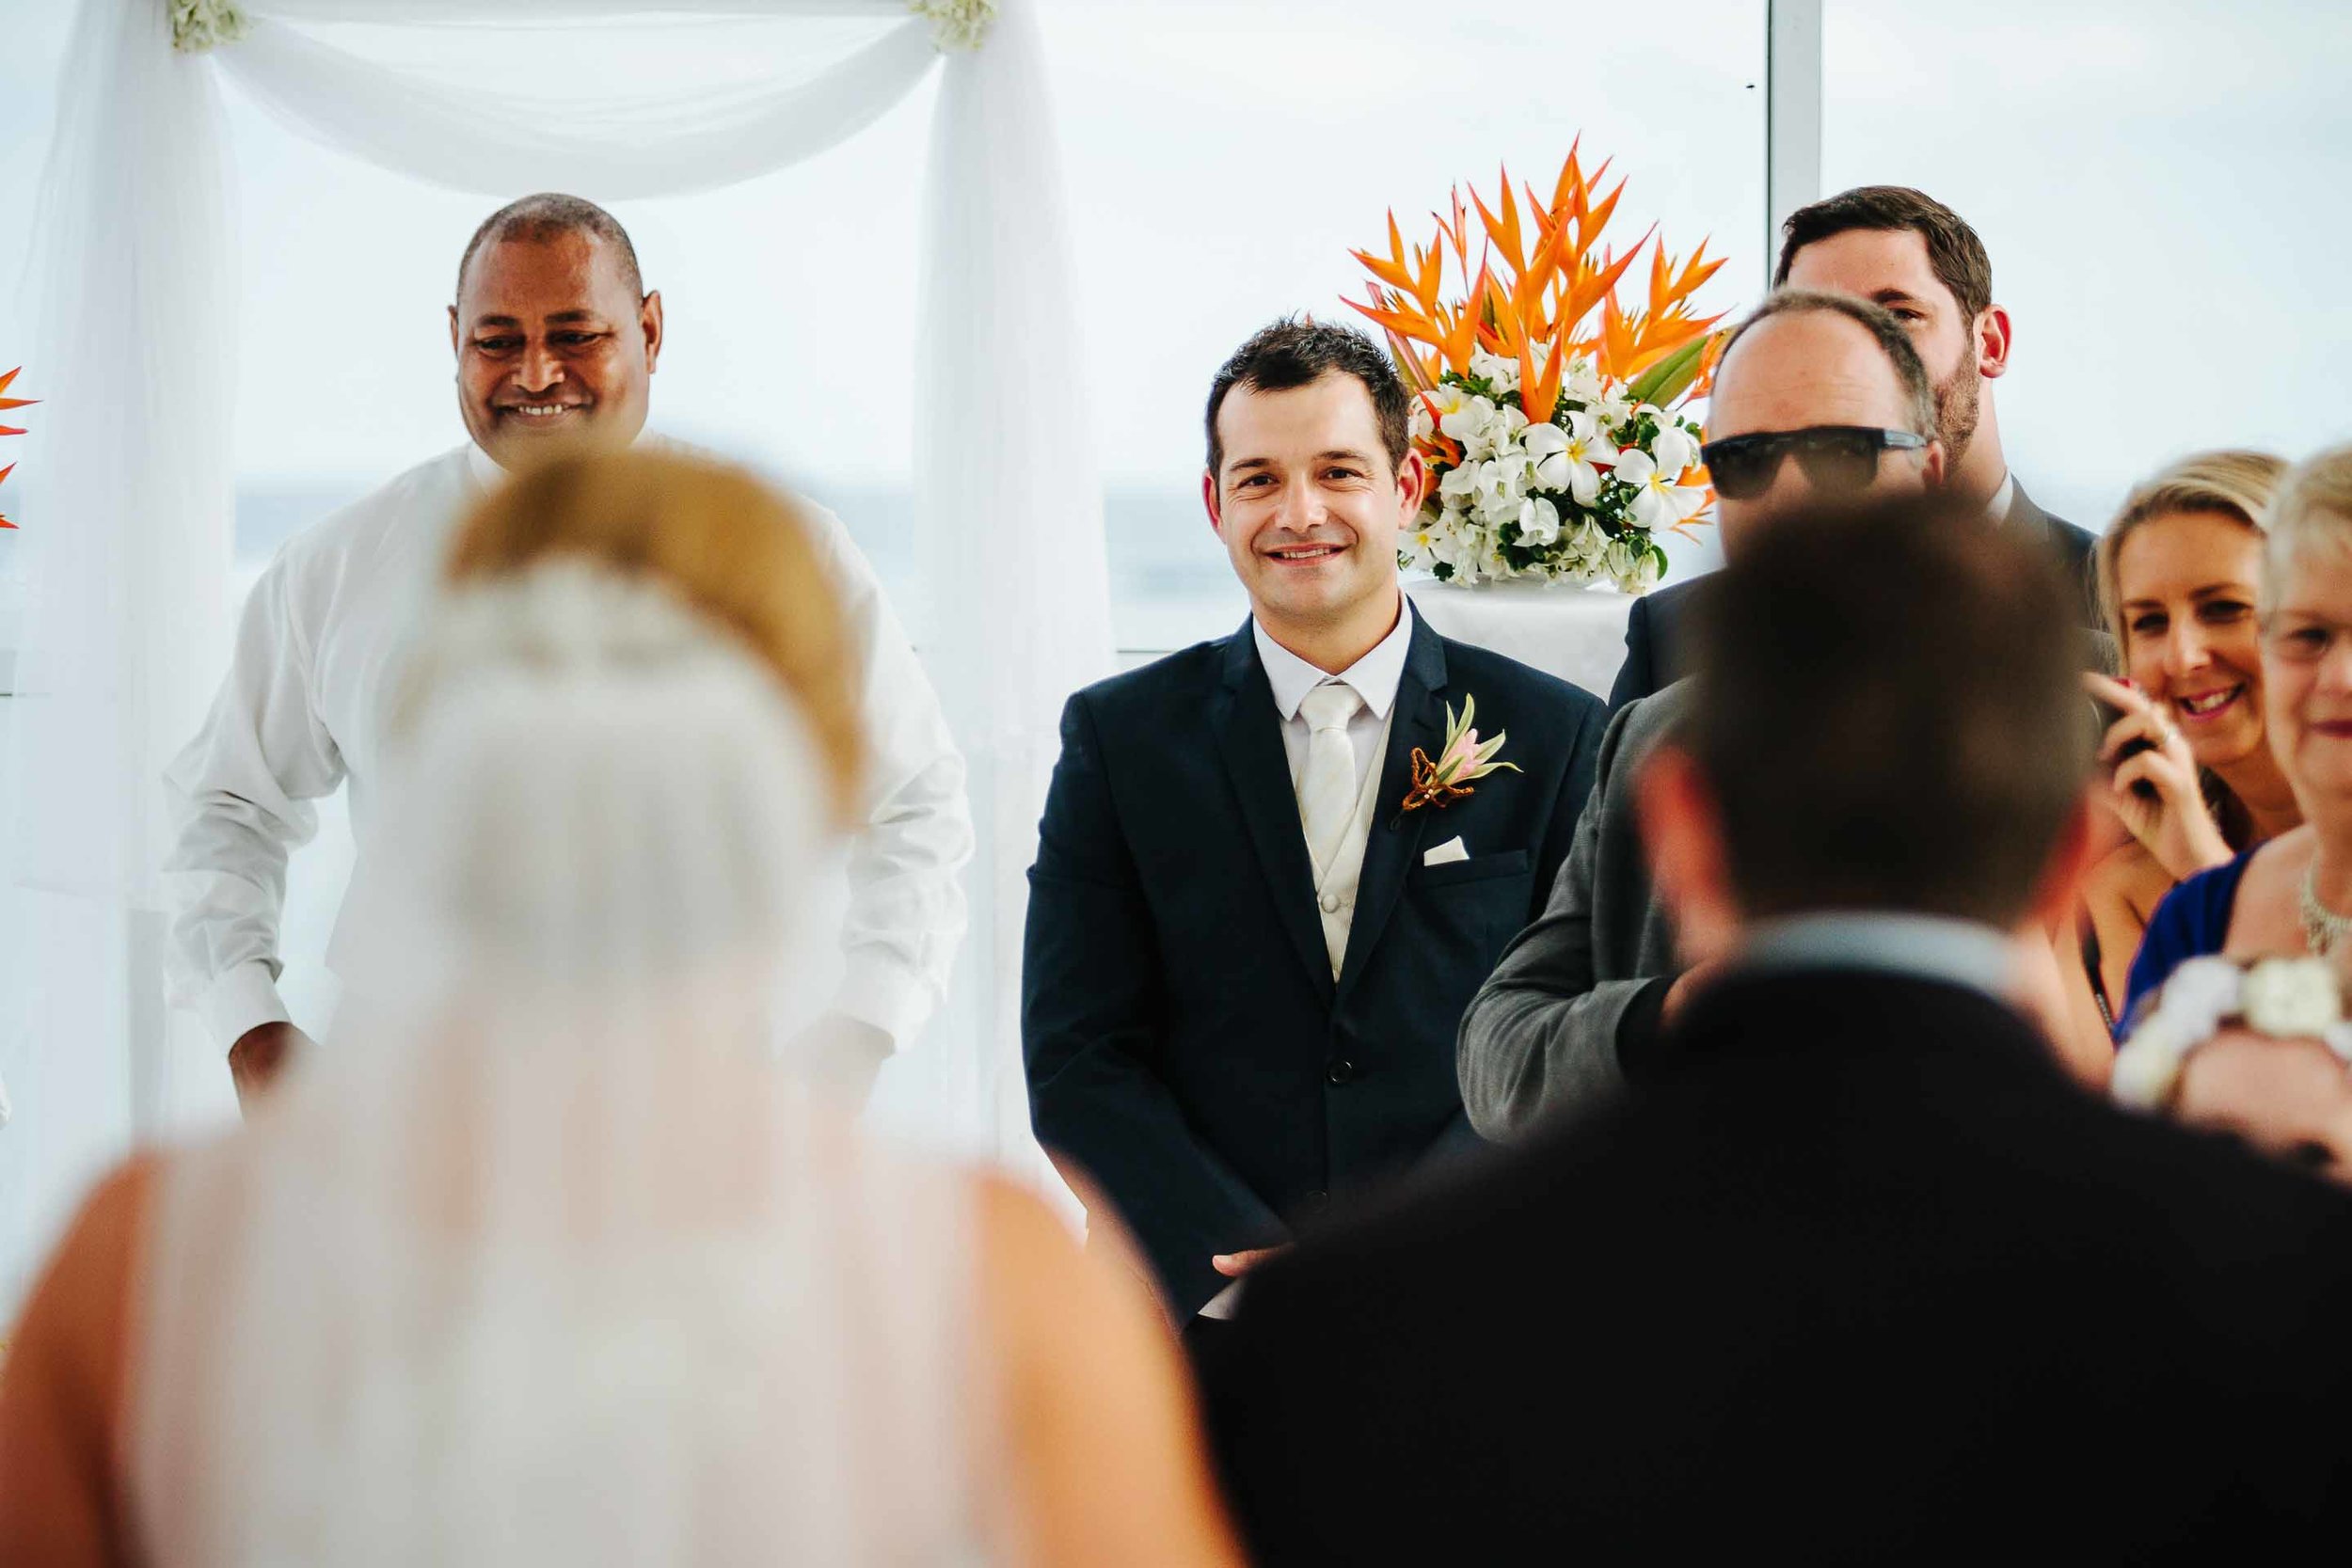 groom seeing bride for the first time